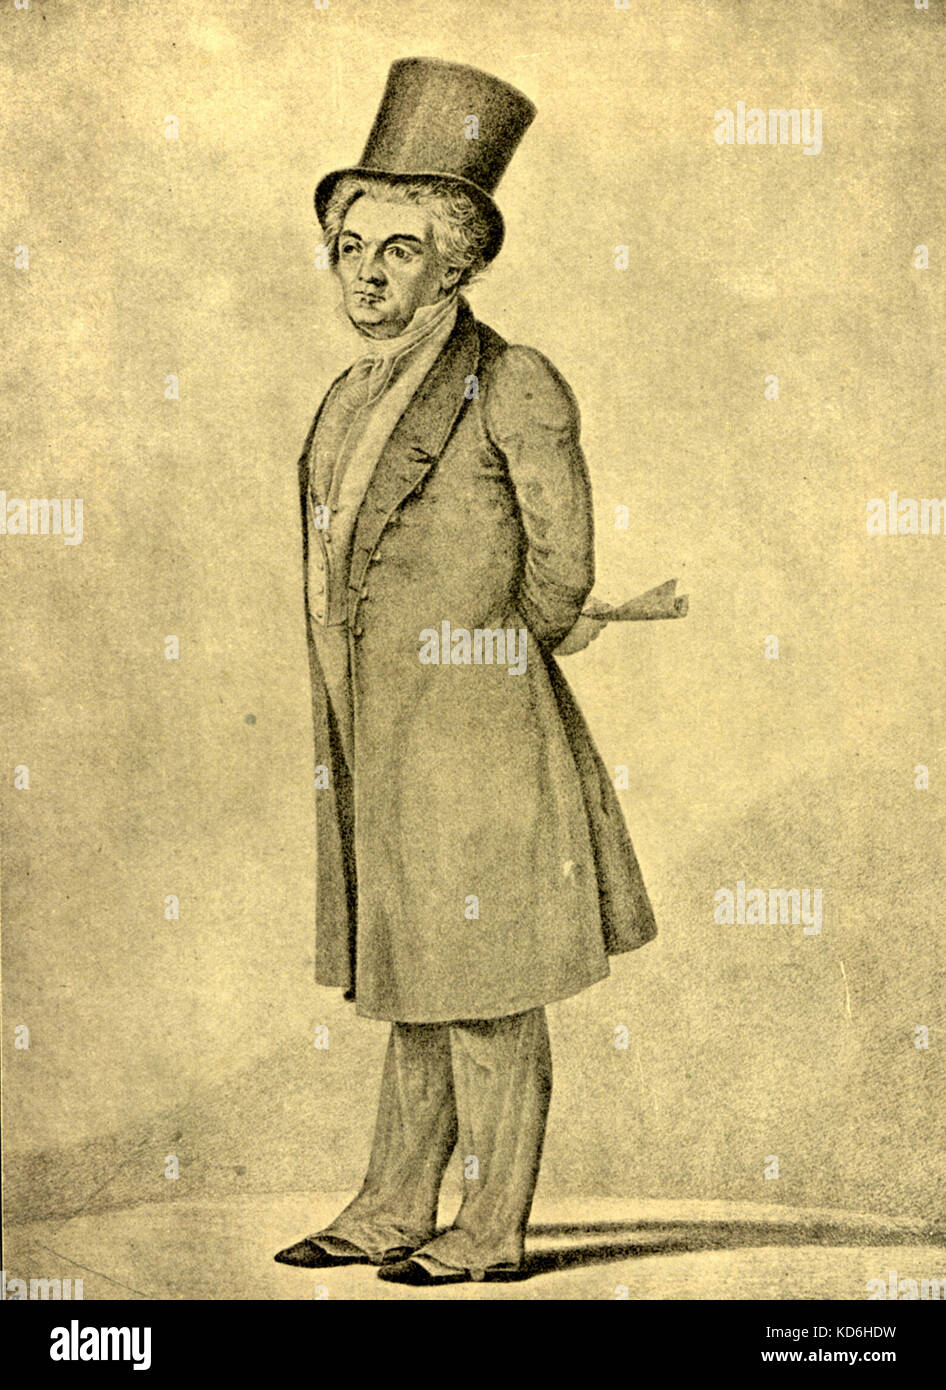 Ludwig van Beethoven Based on a lithograph by Martin Tejcek. Wearing a hat. German composer 1770-1827. Stock Photo